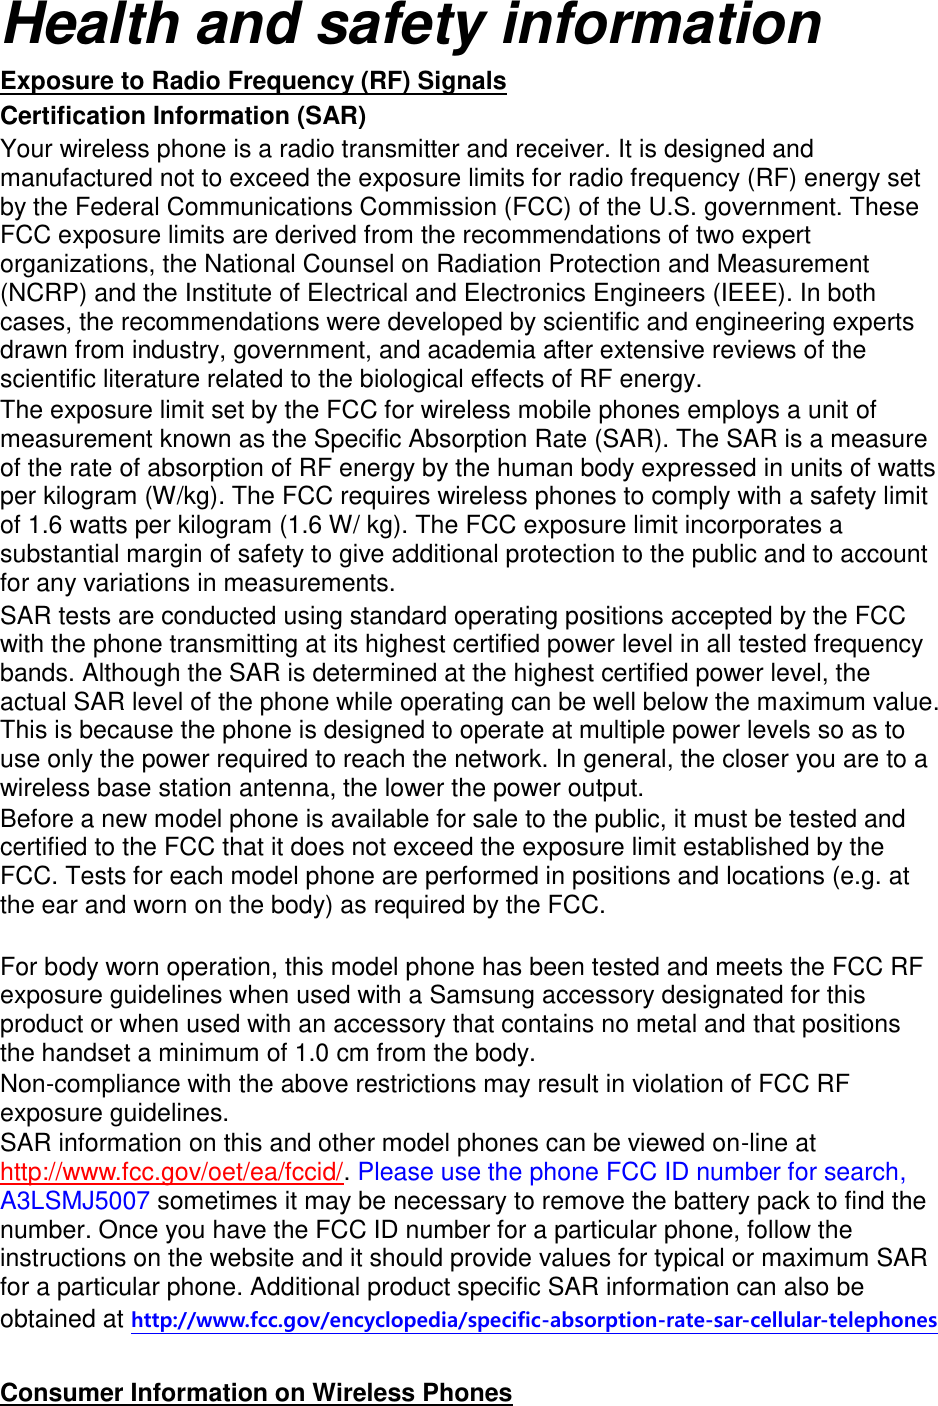 Health and safety information Exposure to Radio Frequency (RF) Signals Certification Information (SAR) Your wireless phone is a radio transmitter and receiver. It is designed and manufactured not to exceed the exposure limits for radio frequency (RF) energy set by the Federal Communications Commission (FCC) of the U.S. government. These FCC exposure limits are derived from the recommendations of two expert organizations, the National Counsel on Radiation Protection and Measurement (NCRP) and the Institute of Electrical and Electronics Engineers (IEEE). In both cases, the recommendations were developed by scientific and engineering experts drawn from industry, government, and academia after extensive reviews of the scientific literature related to the biological effects of RF energy. The exposure limit set by the FCC for wireless mobile phones employs a unit of measurement known as the Specific Absorption Rate (SAR). The SAR is a measure of the rate of absorption of RF energy by the human body expressed in units of watts per kilogram (W/kg). The FCC requires wireless phones to comply with a safety limit of 1.6 watts per kilogram (1.6 W/ kg). The FCC exposure limit incorporates a substantial margin of safety to give additional protection to the public and to account for any variations in measurements. SAR tests are conducted using standard operating positions accepted by the FCC with the phone transmitting at its highest certified power level in all tested frequency bands. Although the SAR is determined at the highest certified power level, the actual SAR level of the phone while operating can be well below the maximum value. This is because the phone is designed to operate at multiple power levels so as to use only the power required to reach the network. In general, the closer you are to a wireless base station antenna, the lower the power output. Before a new model phone is available for sale to the public, it must be tested and certified to the FCC that it does not exceed the exposure limit established by the FCC. Tests for each model phone are performed in positions and locations (e.g. at the ear and worn on the body) as required by the FCC.      For body worn operation, this model phone has been tested and meets the FCC RF exposure guidelines when used with a Samsung accessory designated for this product or when used with an accessory that contains no metal and that positions the handset a minimum of 1.0 cm from the body.   Non-compliance with the above restrictions may result in violation of FCC RF exposure guidelines. SAR information on this and other model phones can be viewed on-line at http://www.fcc.gov/oet/ea/fccid/. Please use the phone FCC ID number for search, A3LSMJ5007 sometimes it may be necessary to remove the battery pack to find the number. Once you have the FCC ID number for a particular phone, follow the instructions on the website and it should provide values for typical or maximum SAR for a particular phone. Additional product specific SAR information can also be obtained at http://www.fcc.gov/encyclopedia/specific-absorption-rate-sar-cellular-telephones  Consumer Information on Wireless Phones 